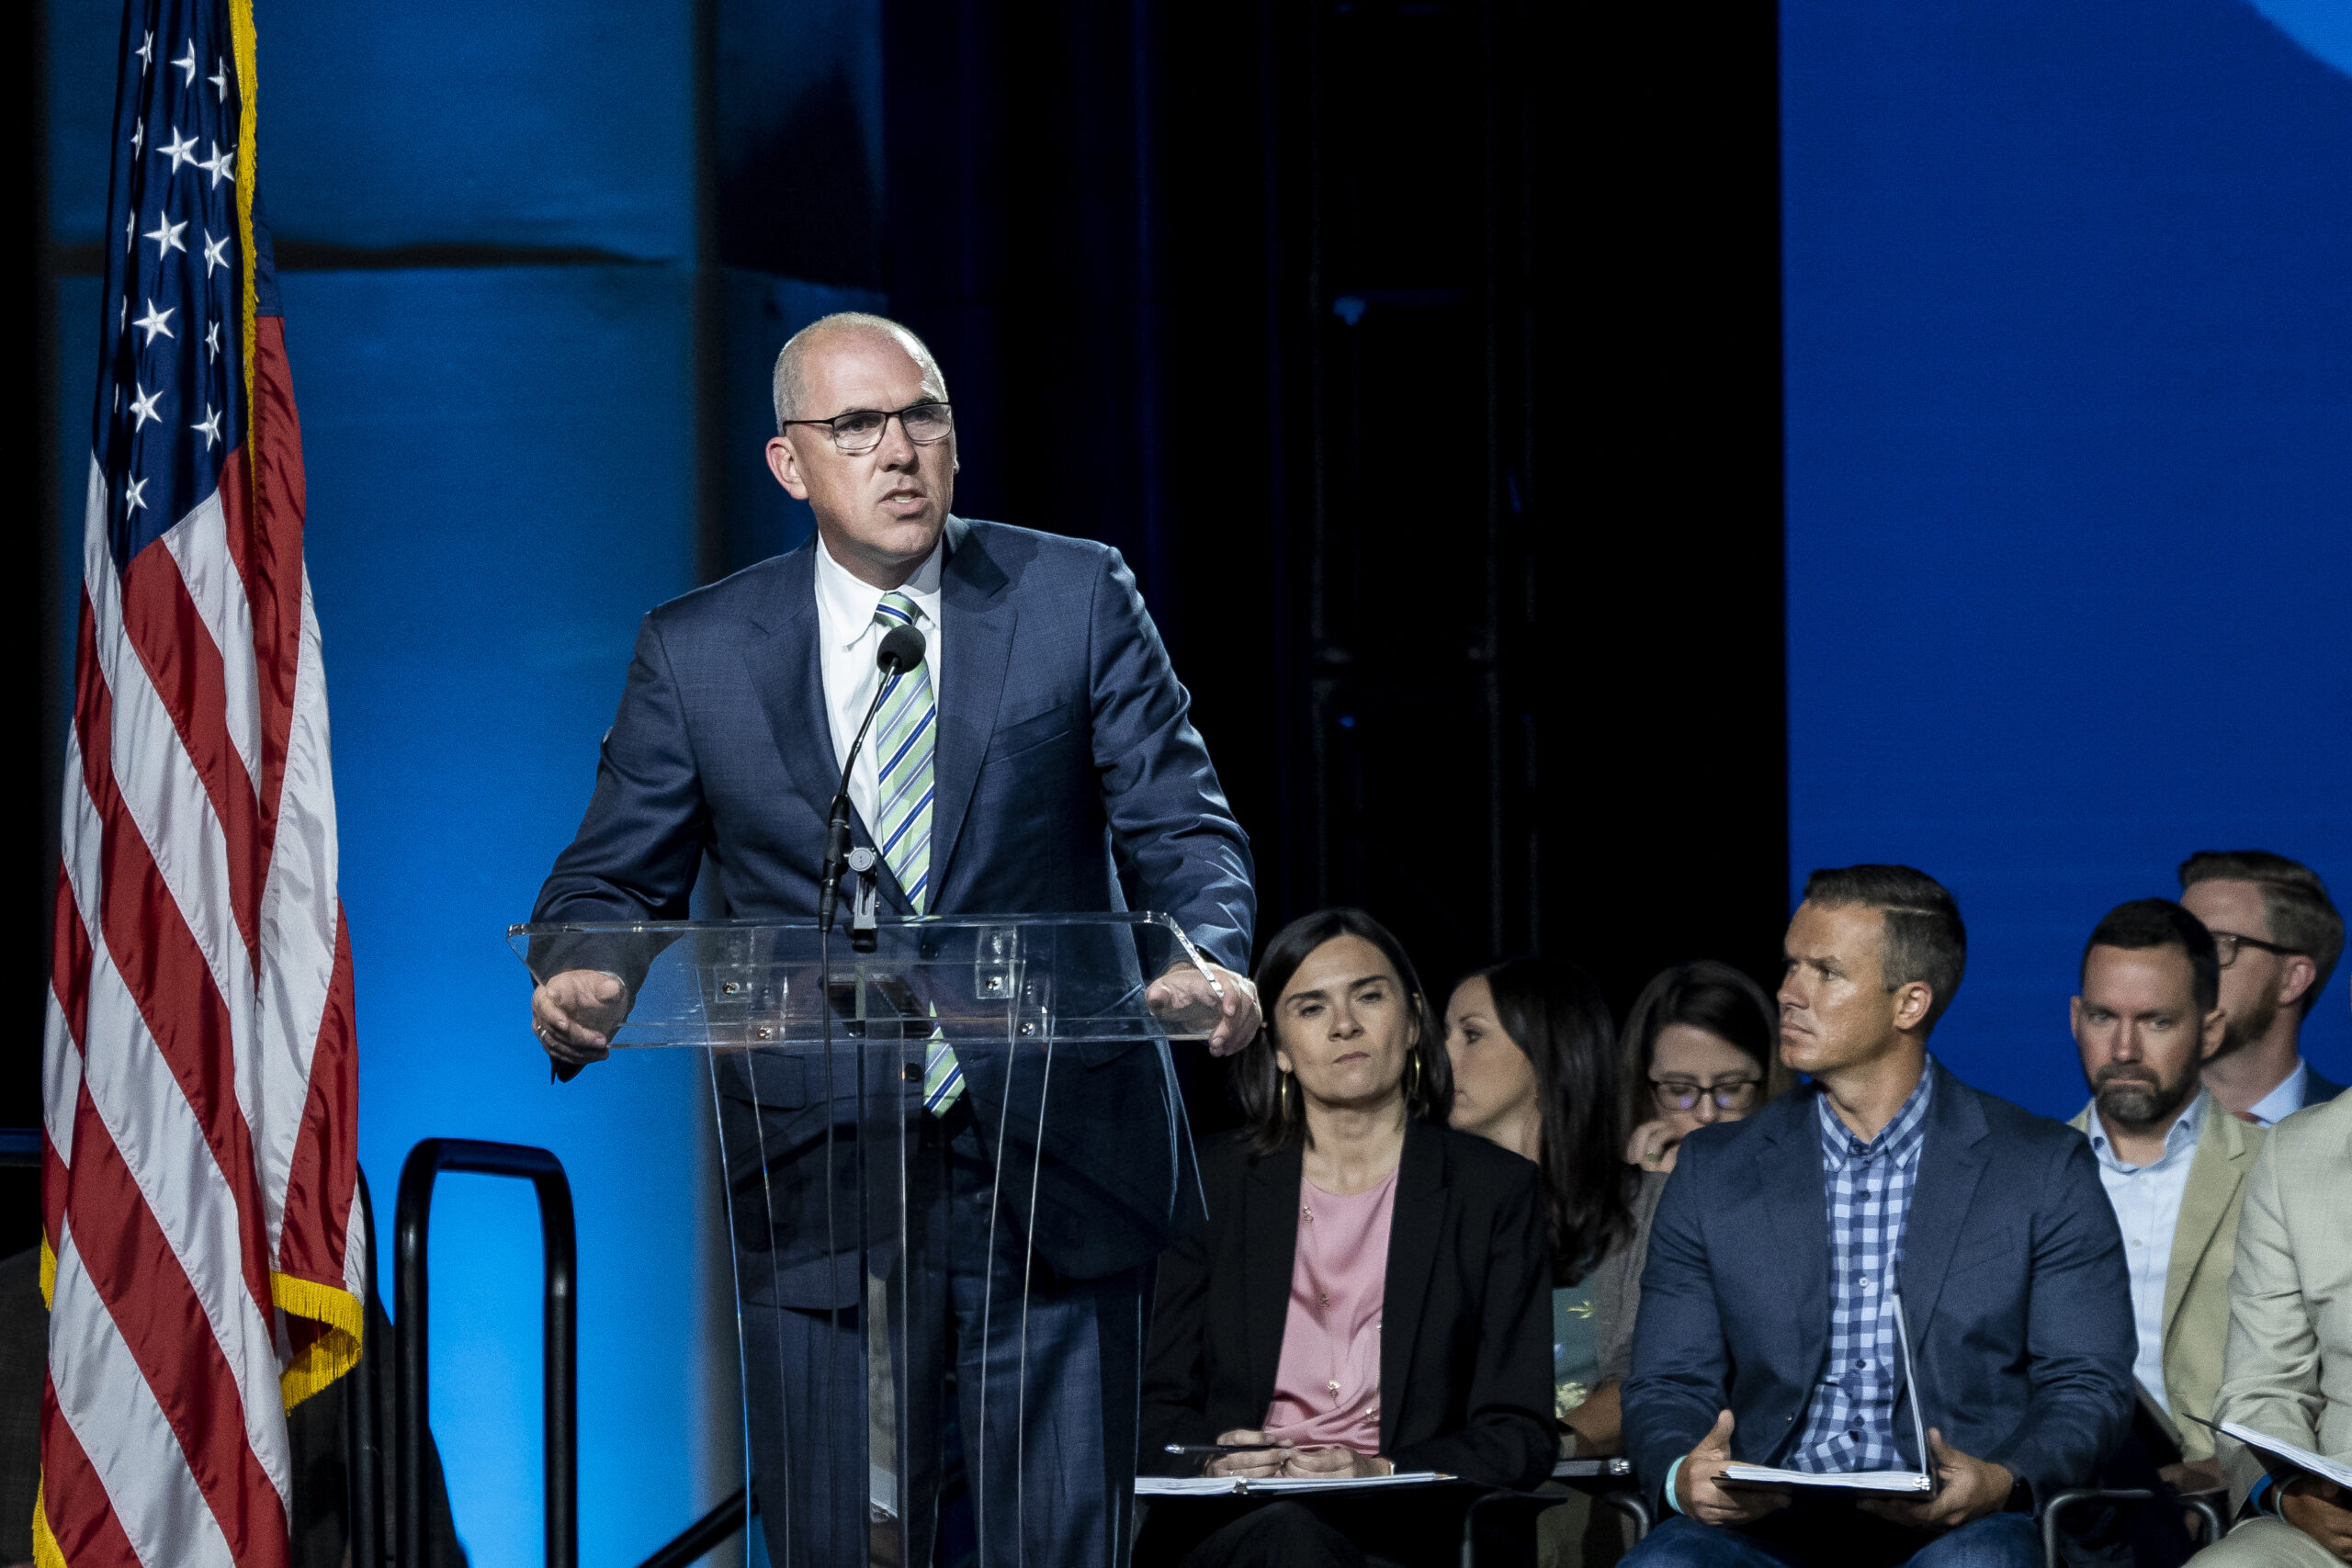 Pastor Bart Barber speaks during the Southern Baptist Convention annual meeting at the Anaheim Convention Center in Anaheim, California, on June 14, 2022. Barber was elected president that night in a runoff vote. Photo by Justin L. Stewart/Religion News Service